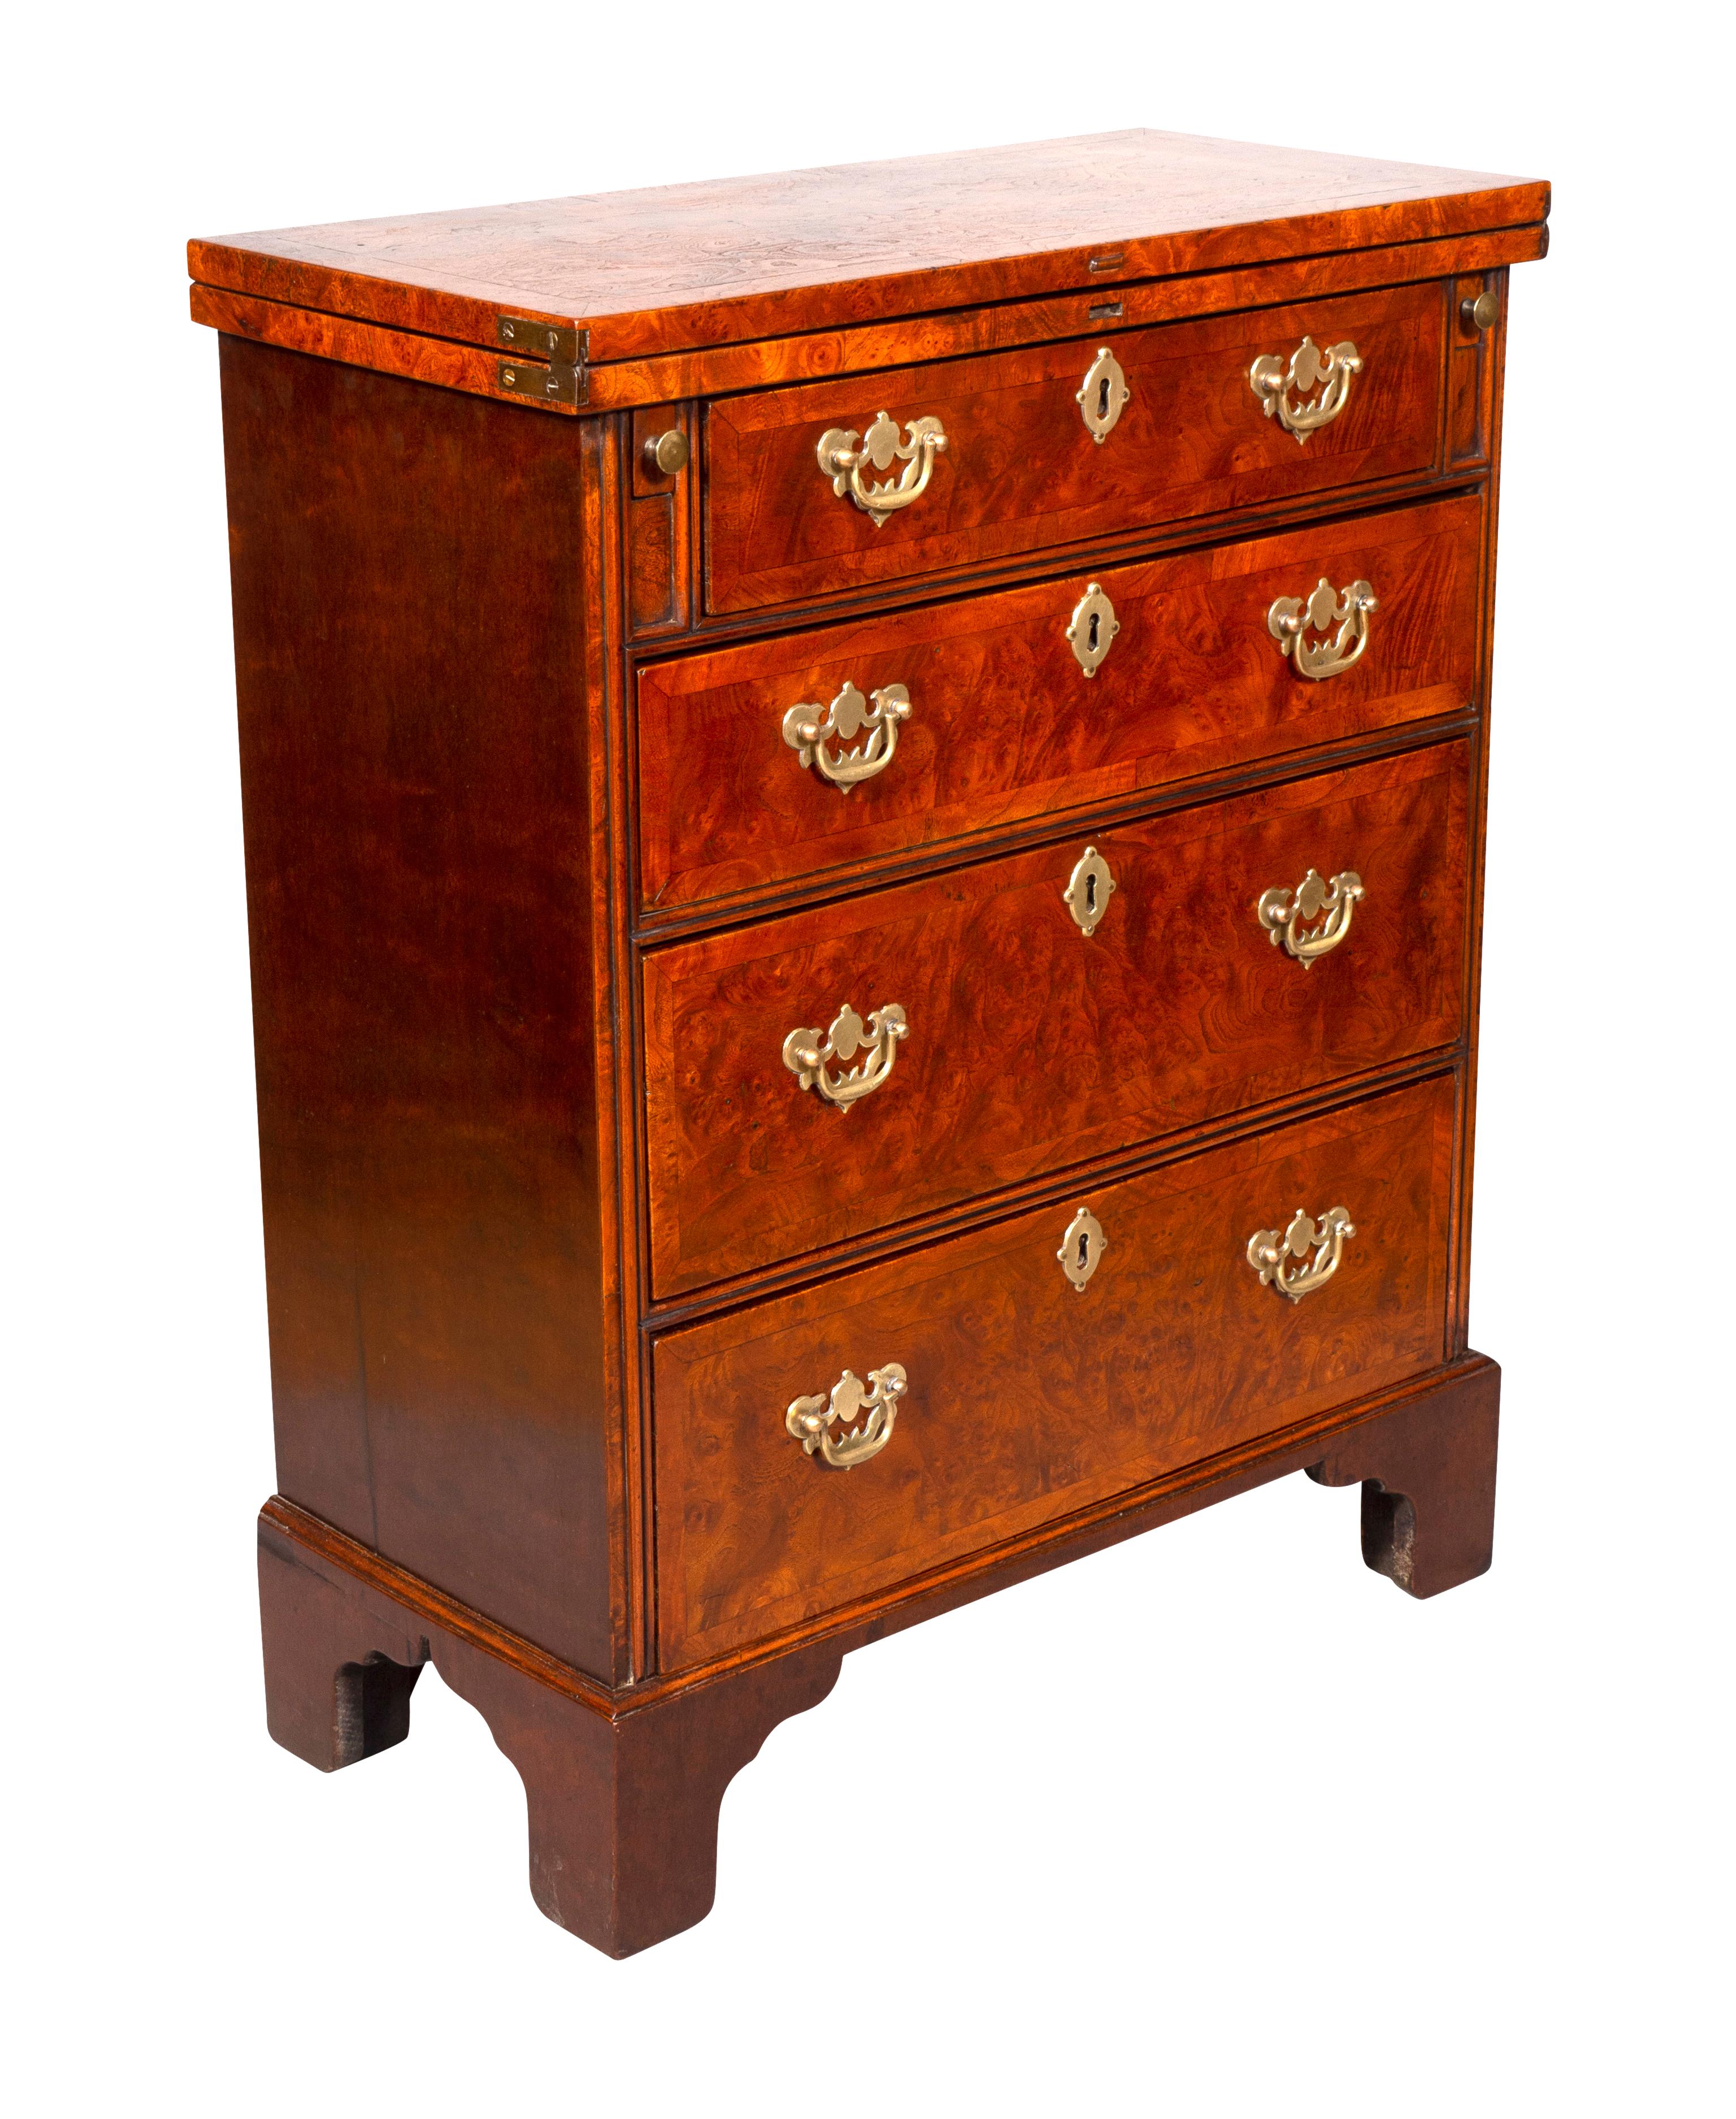 Rectangular hinged top opening to a writing surface over a drawer flanked by lopers to support the top when open over three graduated drawers and bracket feet. Brass hardware.